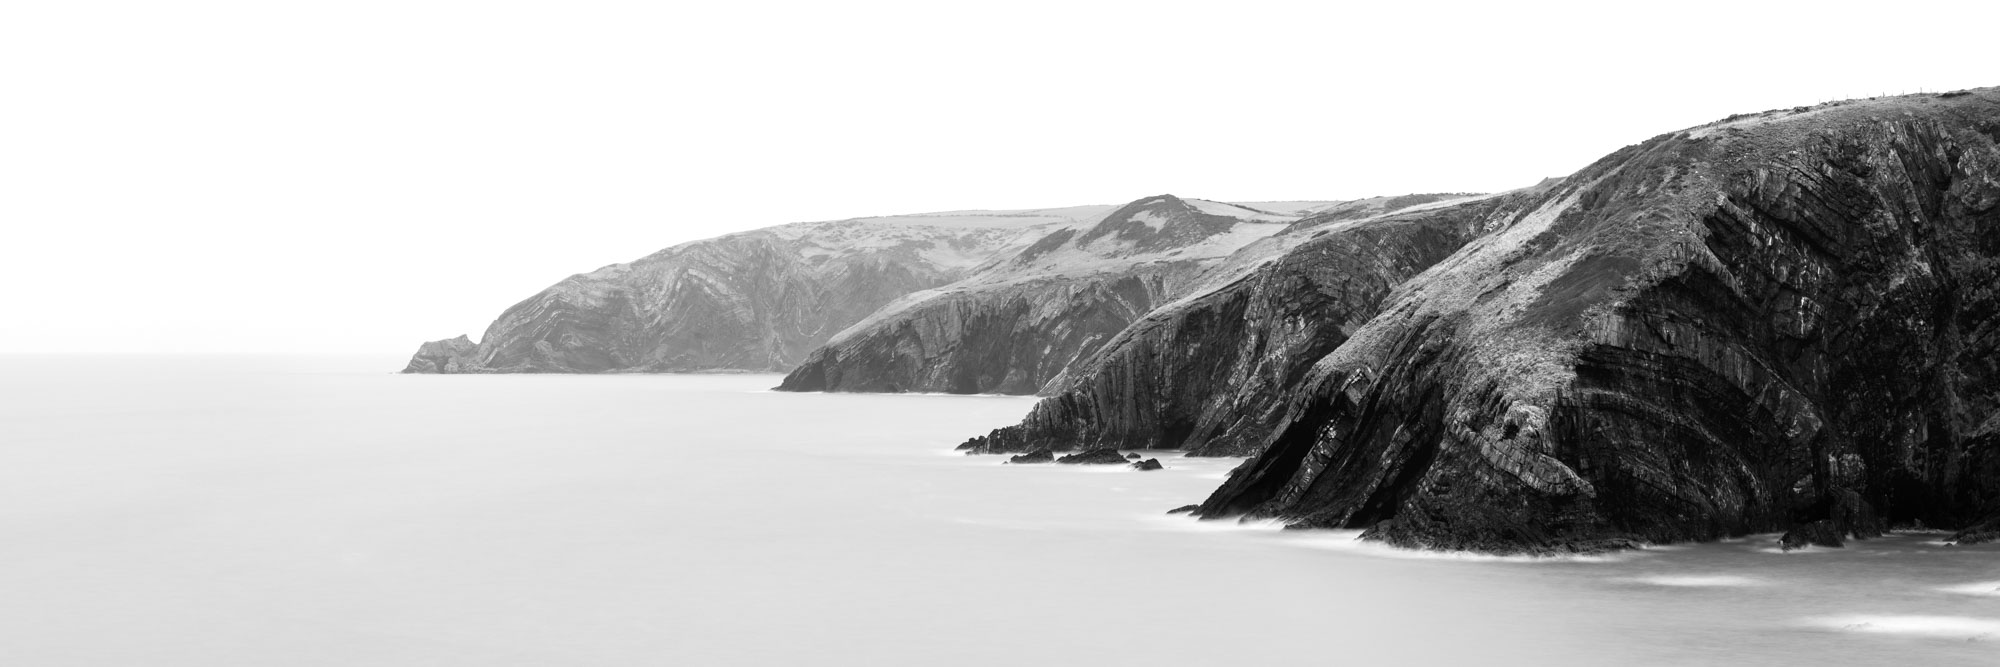 Black and white panorama of Ceibwr Bay in Pembrokeshire